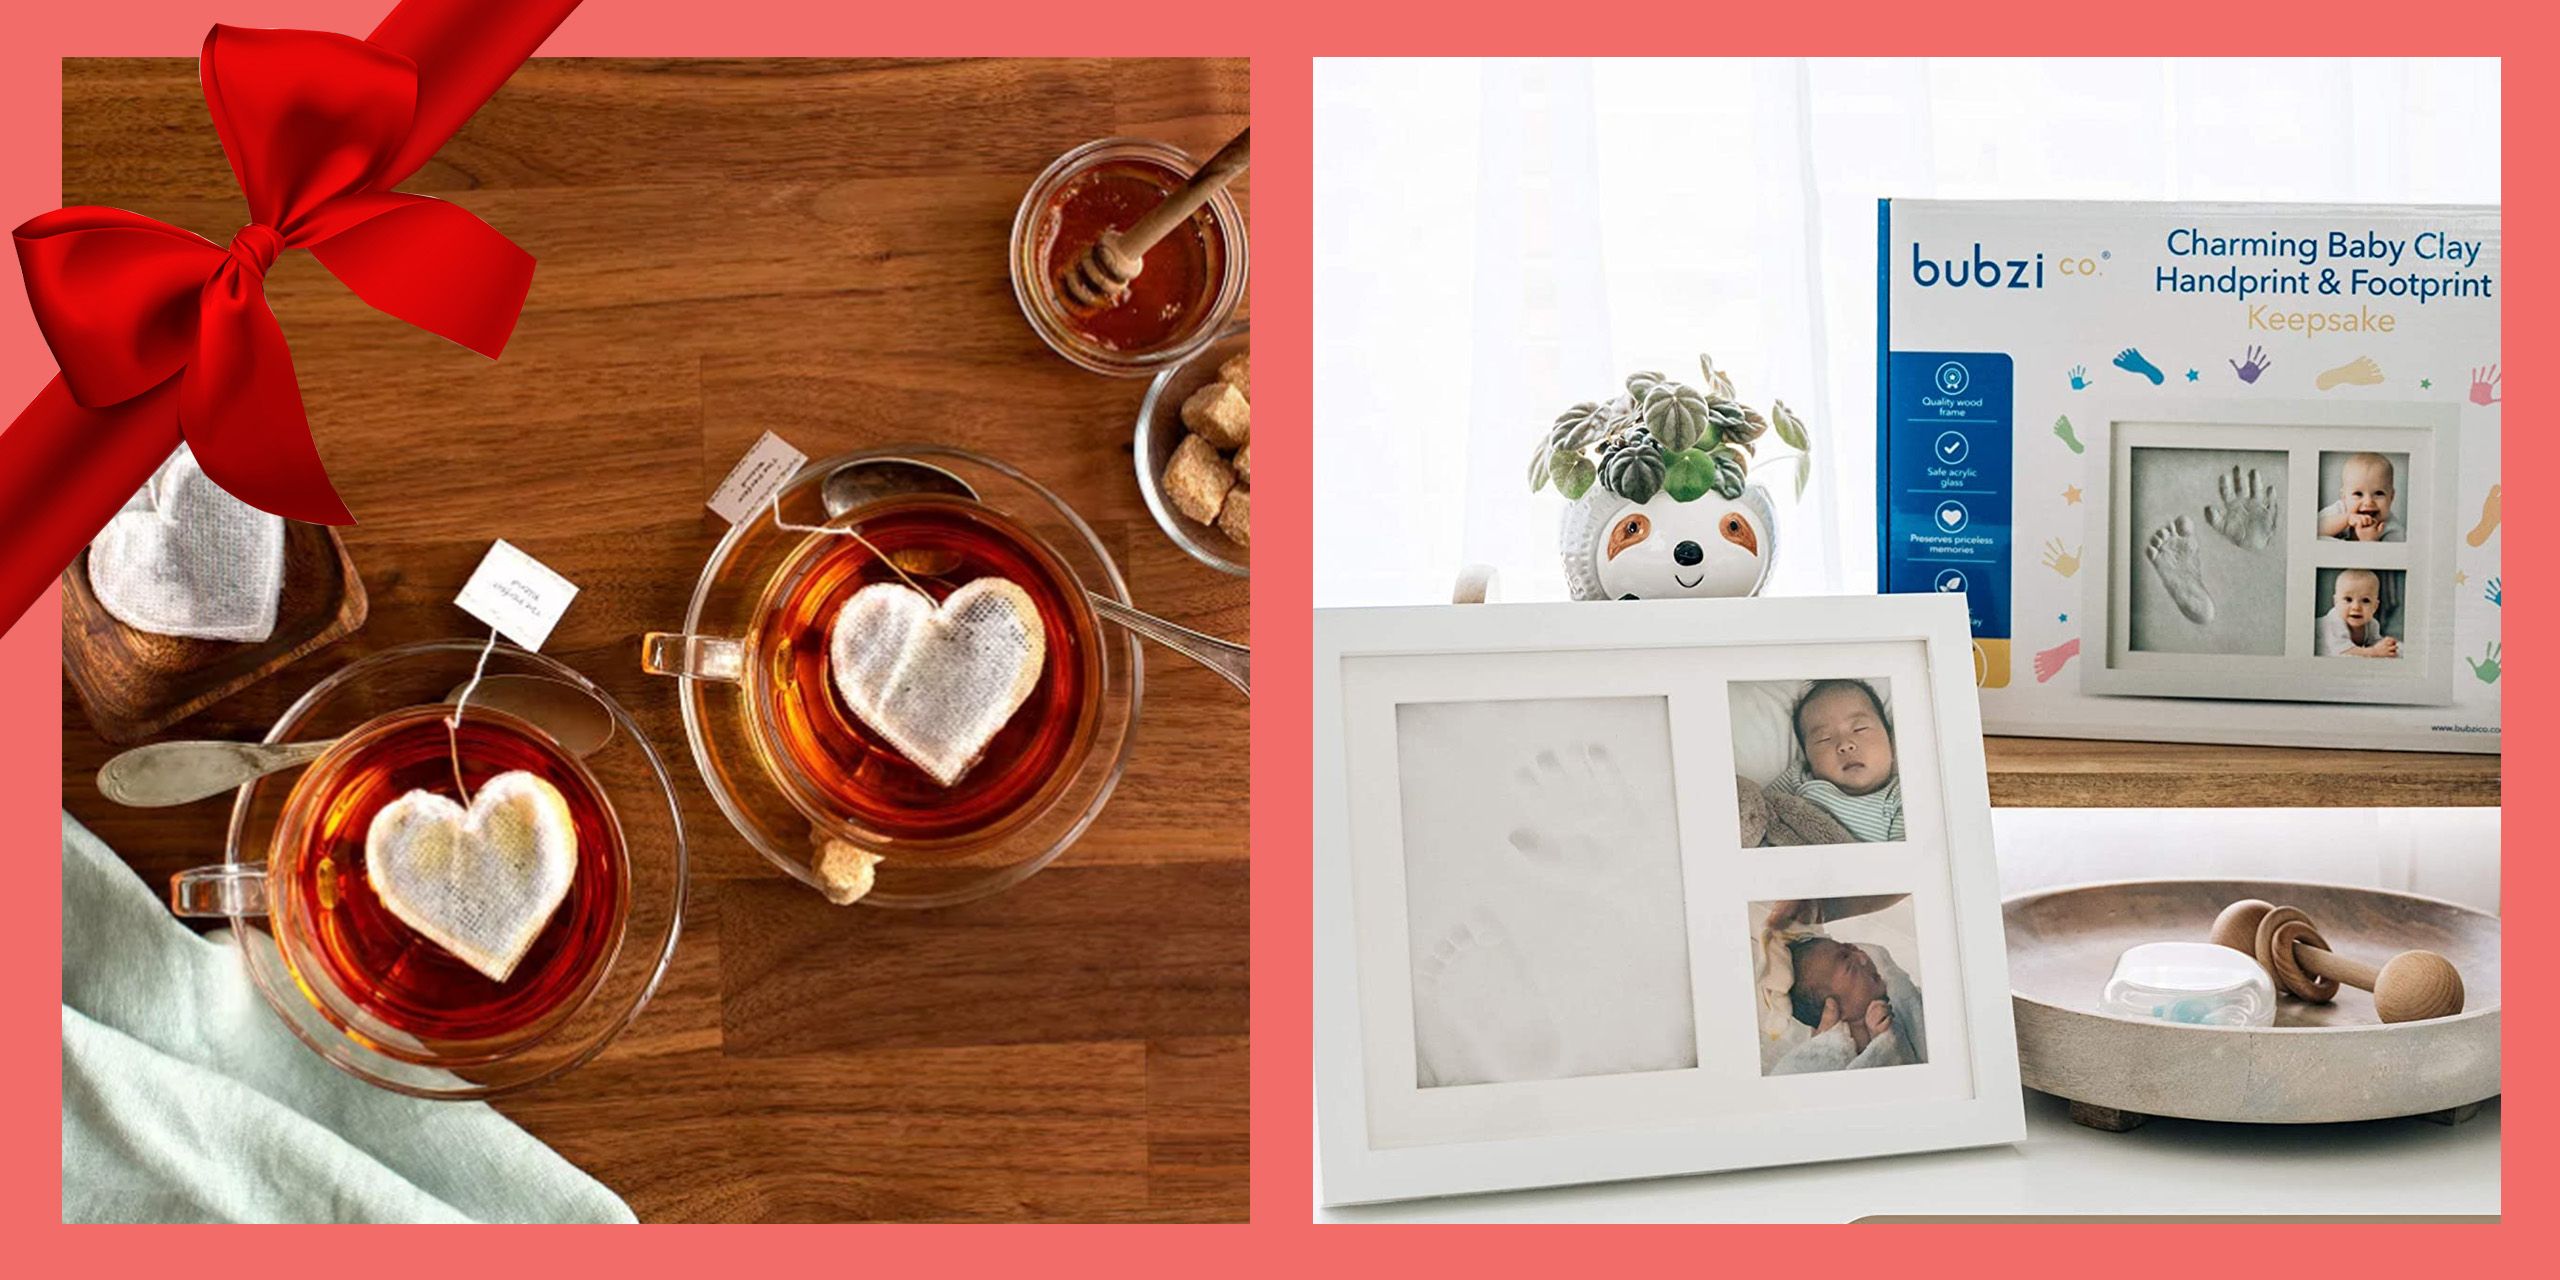 Mothers Day Gift For New Mom - 14 Creative Mother's Day Gift Ideas For Her